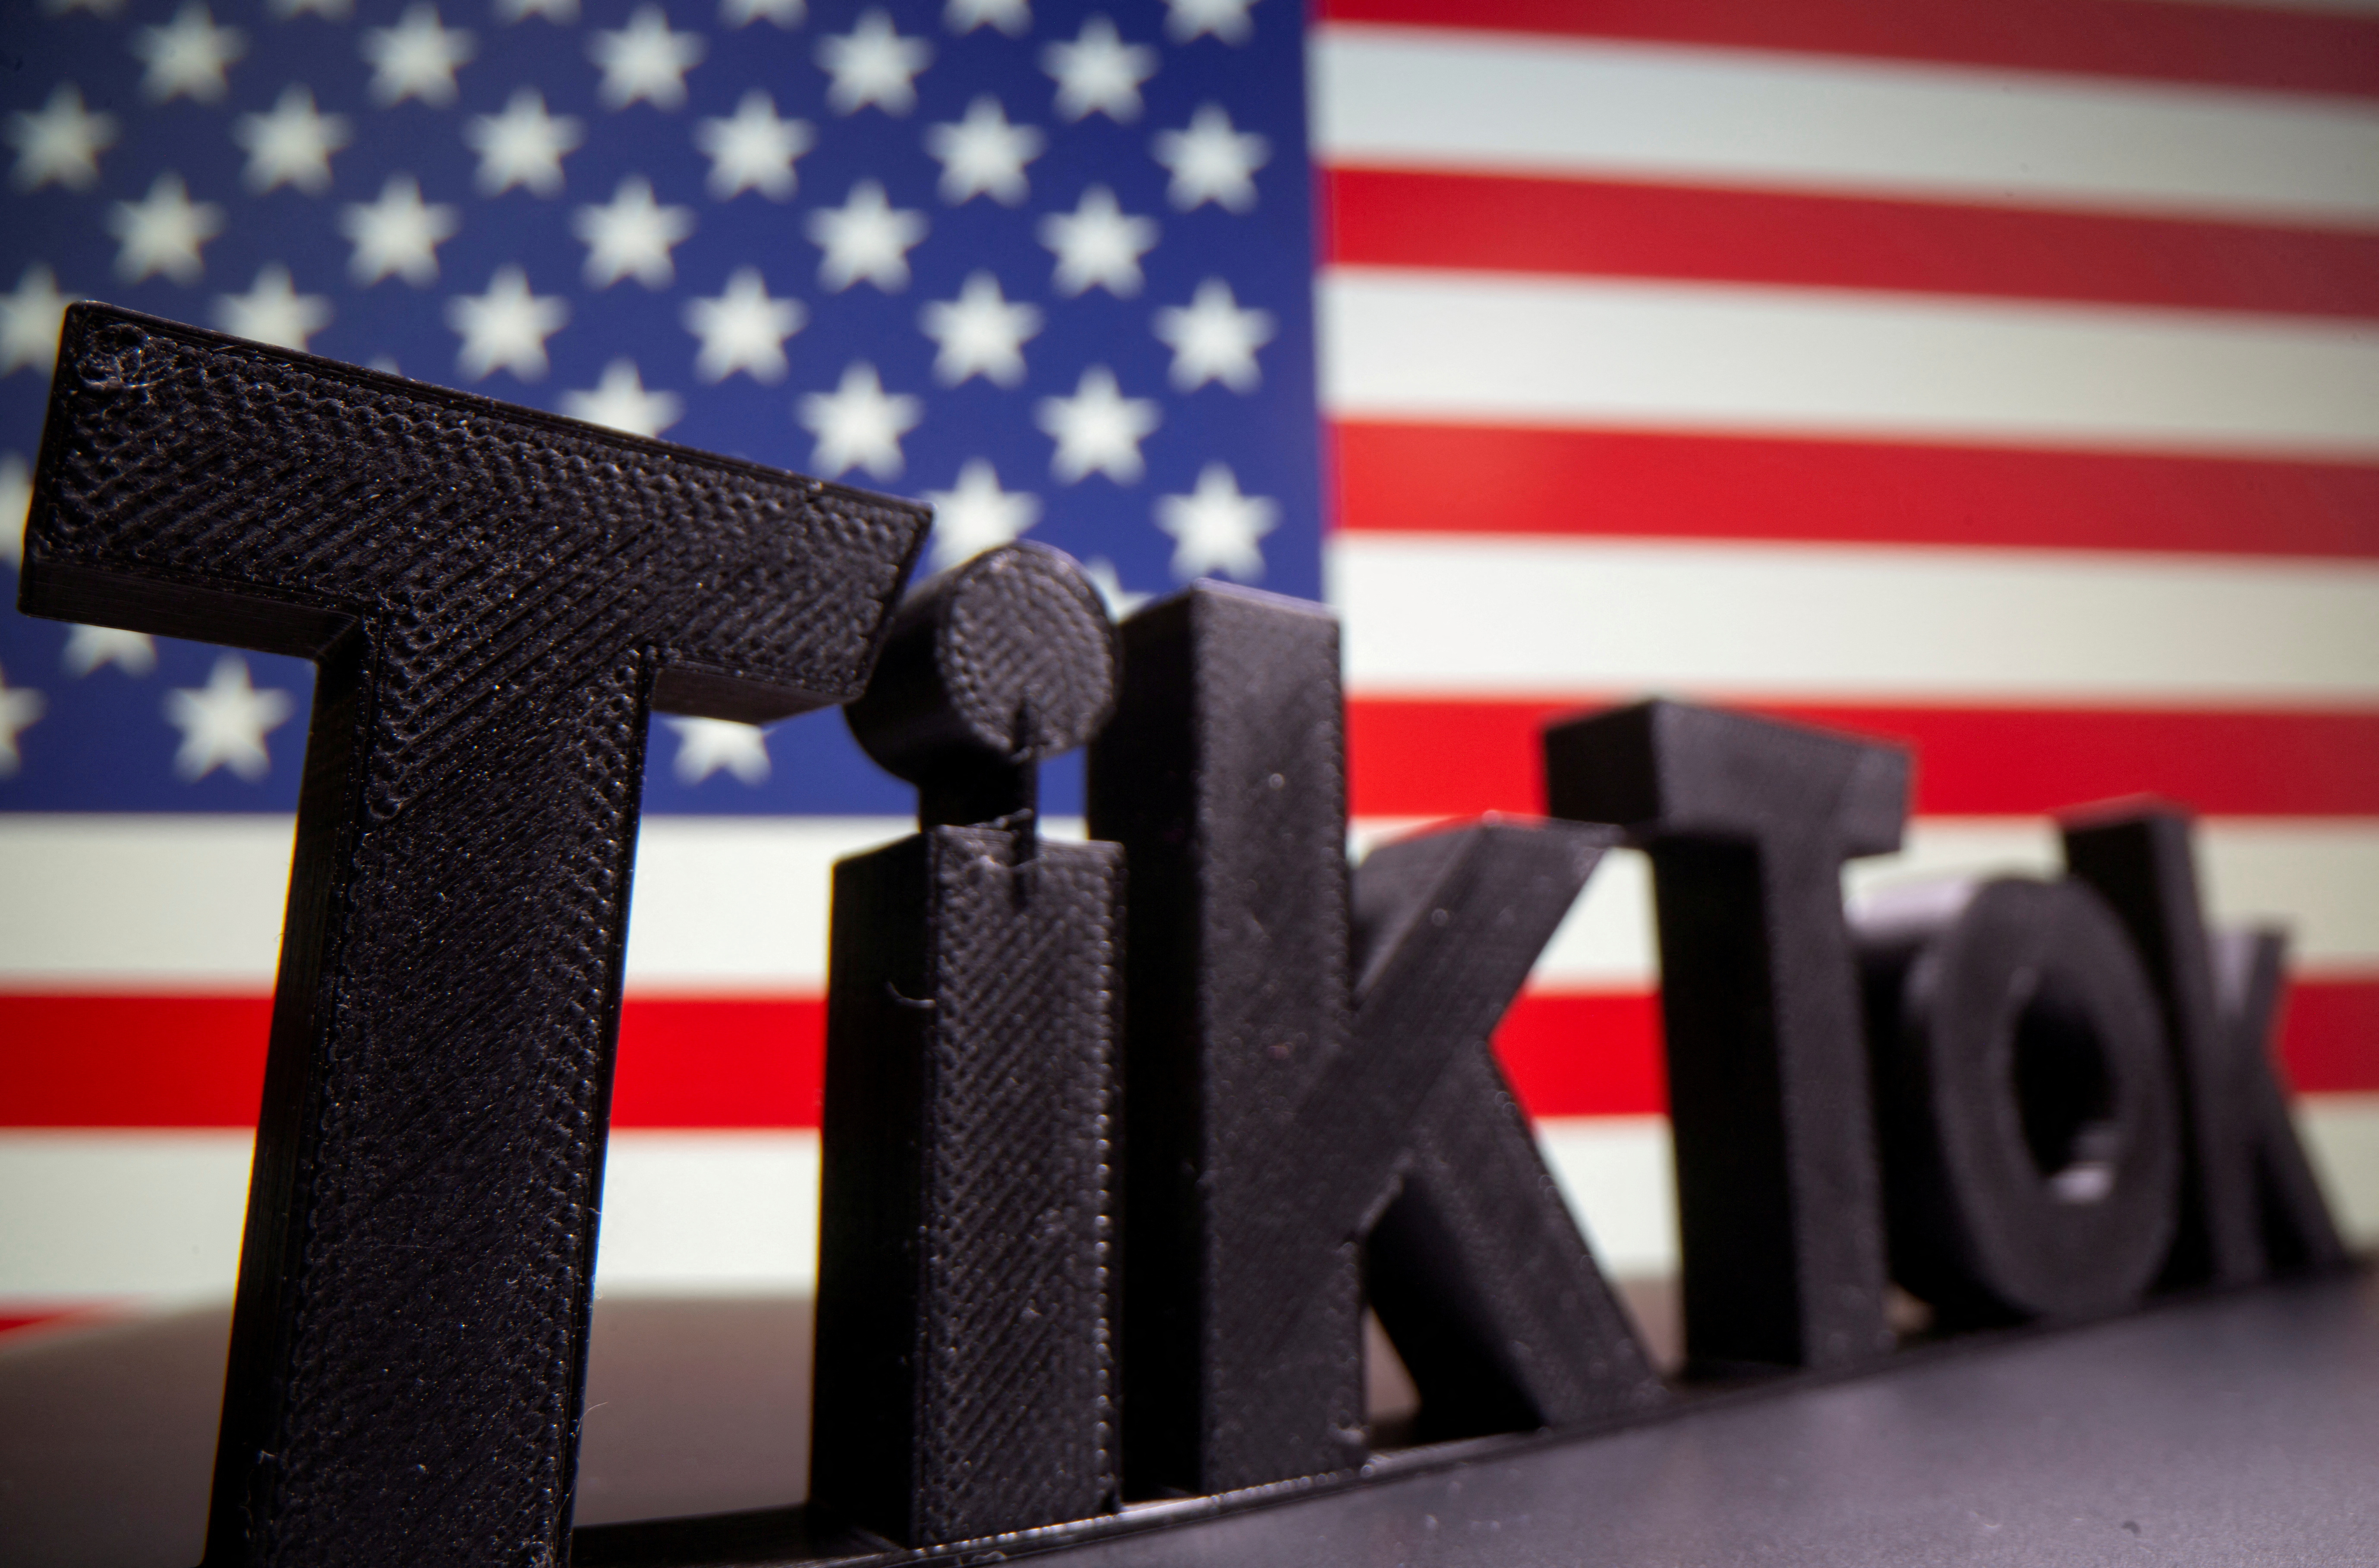 A 3D Printed Tik Tok Logo Is Seen In Front Of The American Flag In This Illustration